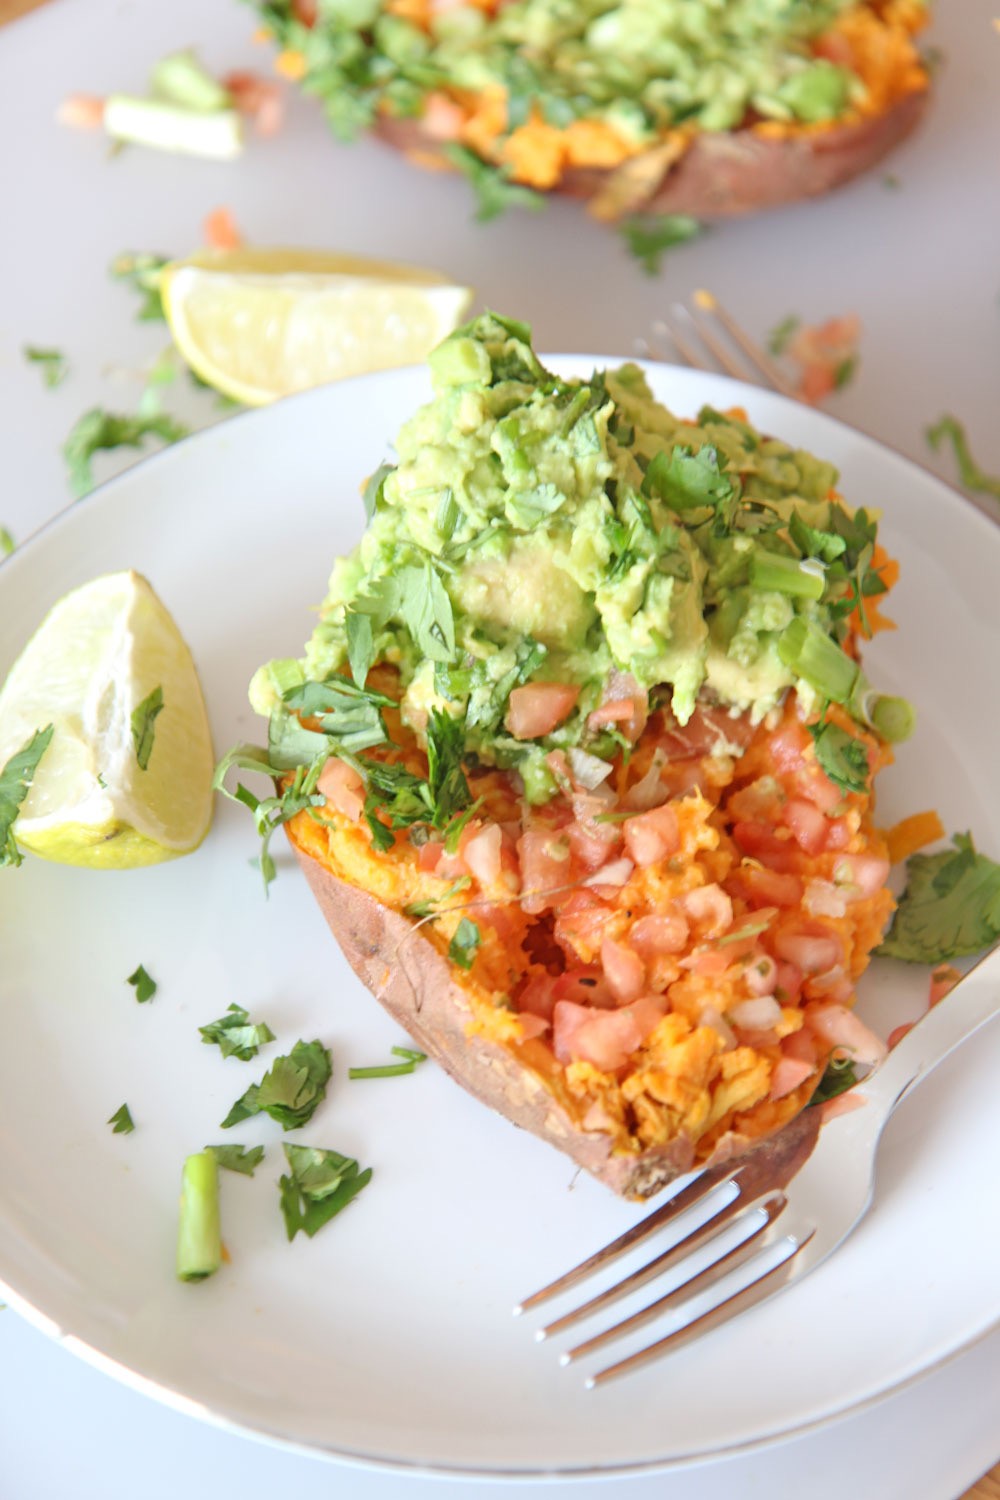 Guacamole Taco Stuffed Sweet Potatoes Recipe. This is the perfect meatless Monday or Taco Tuesday recipe. Also it is vegetarian and a healthy week night dinner. We will do some fun cooking hacks to make this 20 minutes and so hearty yum. Happy taco making! #tacoTuesday #tacorecipe